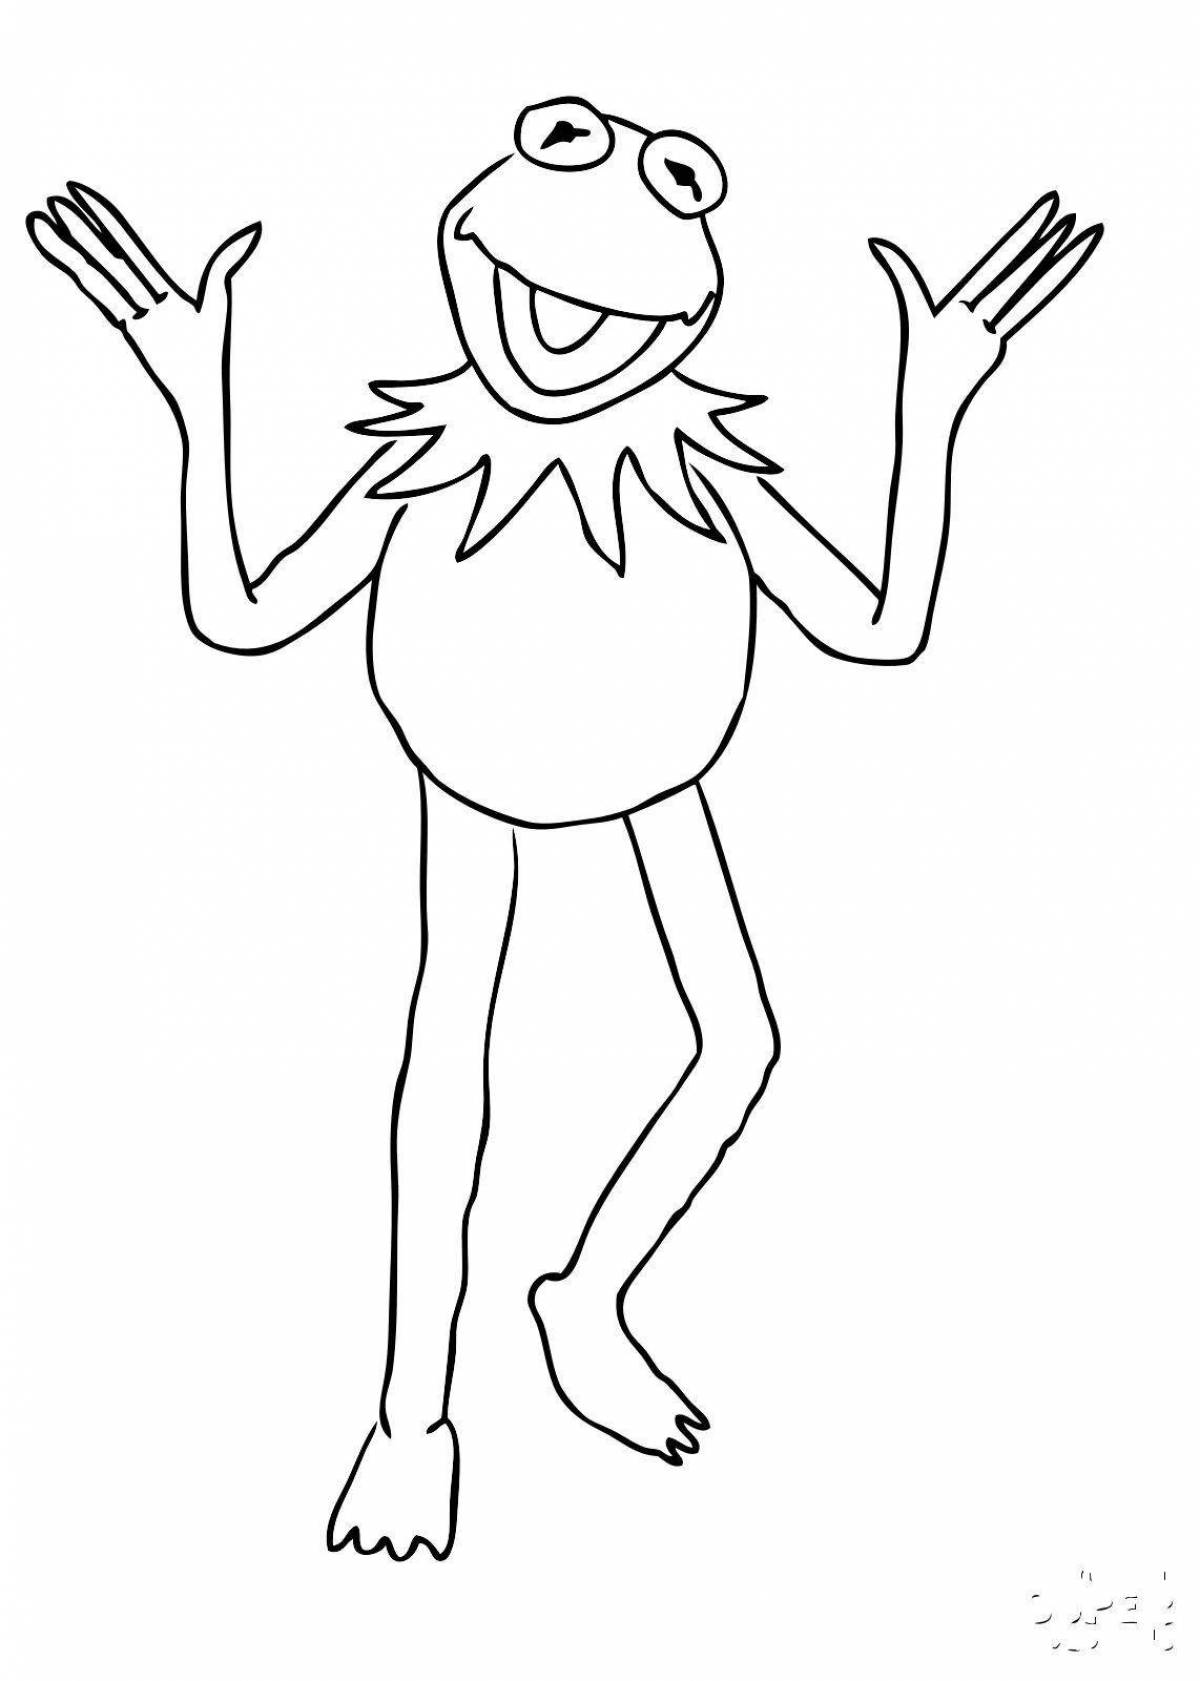 Coloring page adorable frog meme